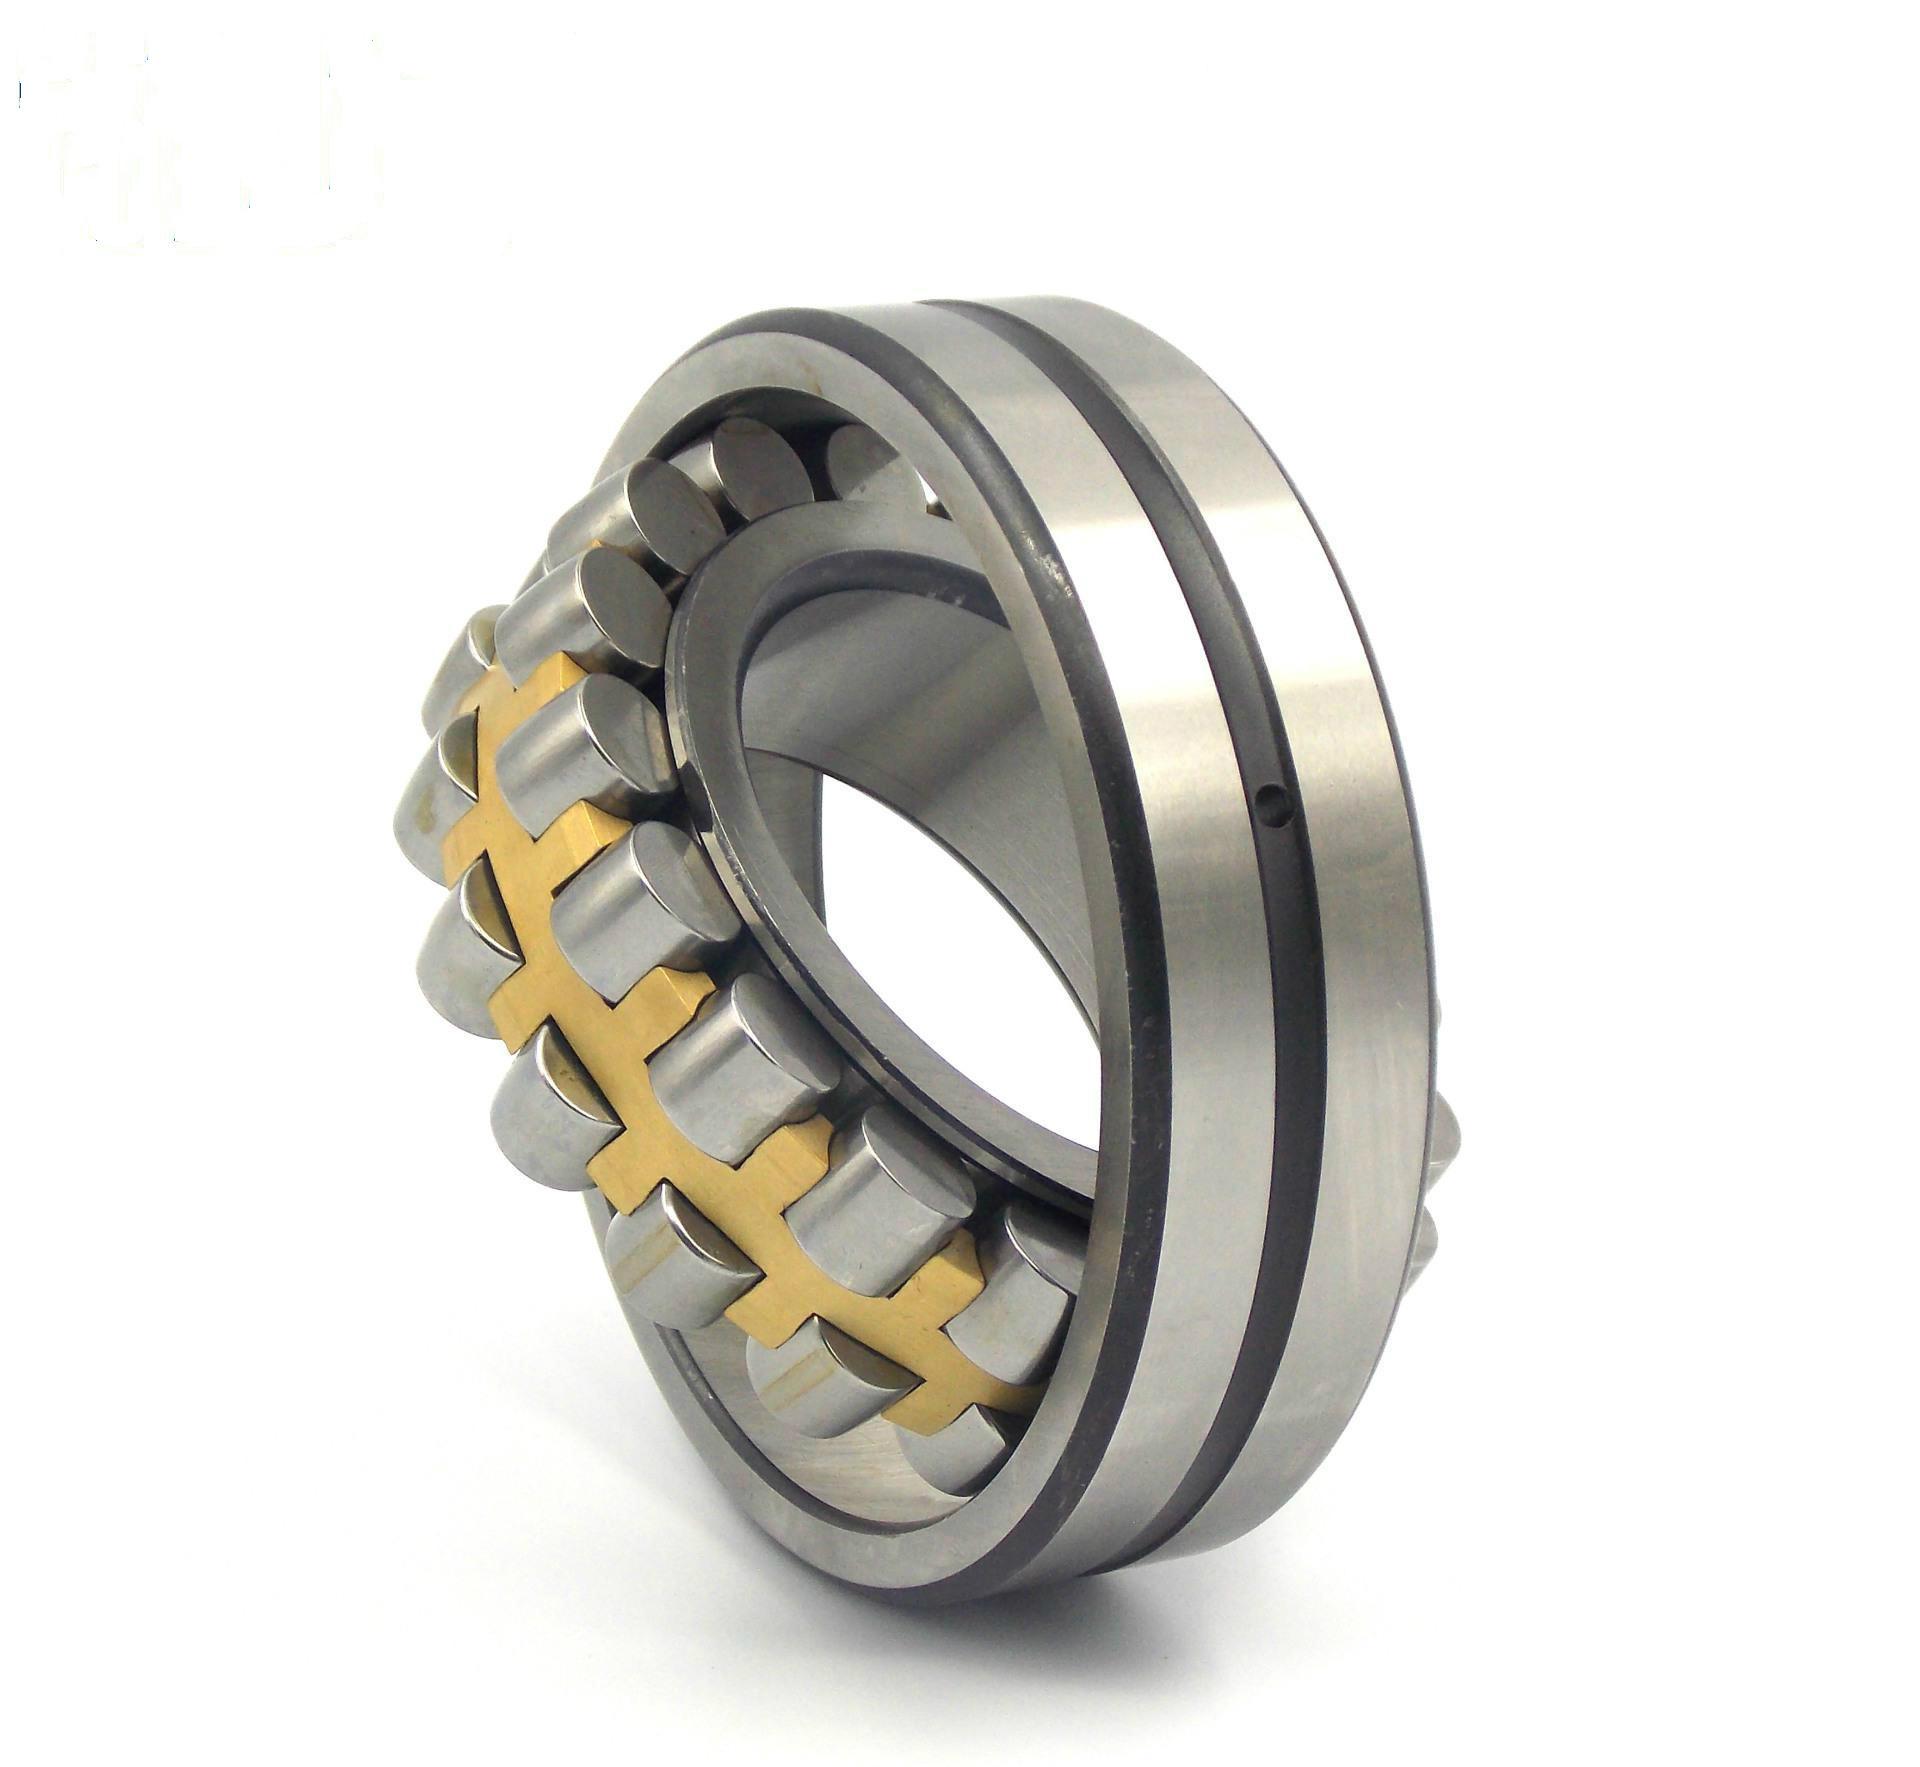  NUP 2319 ECP Cylindrical roller bearing